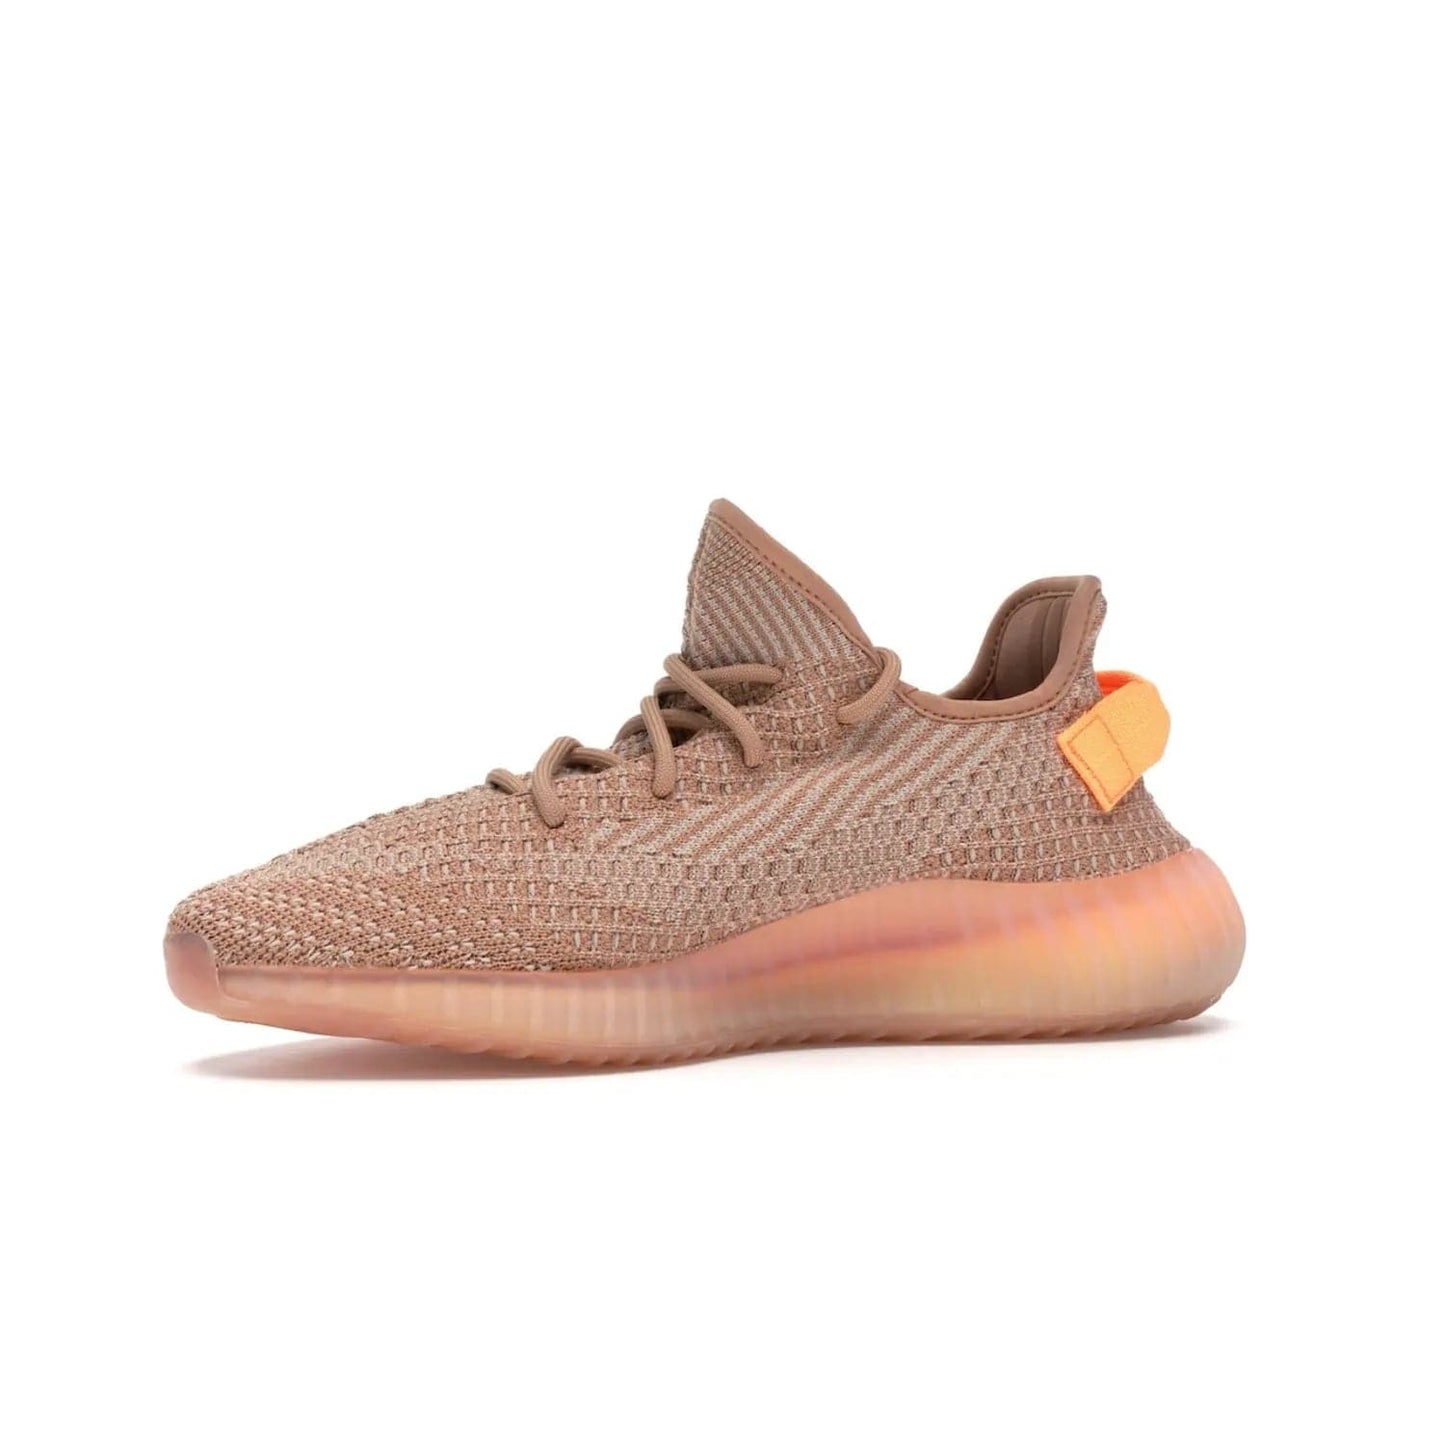 adidas Yeezy Boost 350 V2 Clay - Image 17 - Only at www.BallersClubKickz.com - The adidas Yeezy Boost 350 V2 Clay - style and swag in one shoe. Orange accents, clay midsole and sole. Get yours today!